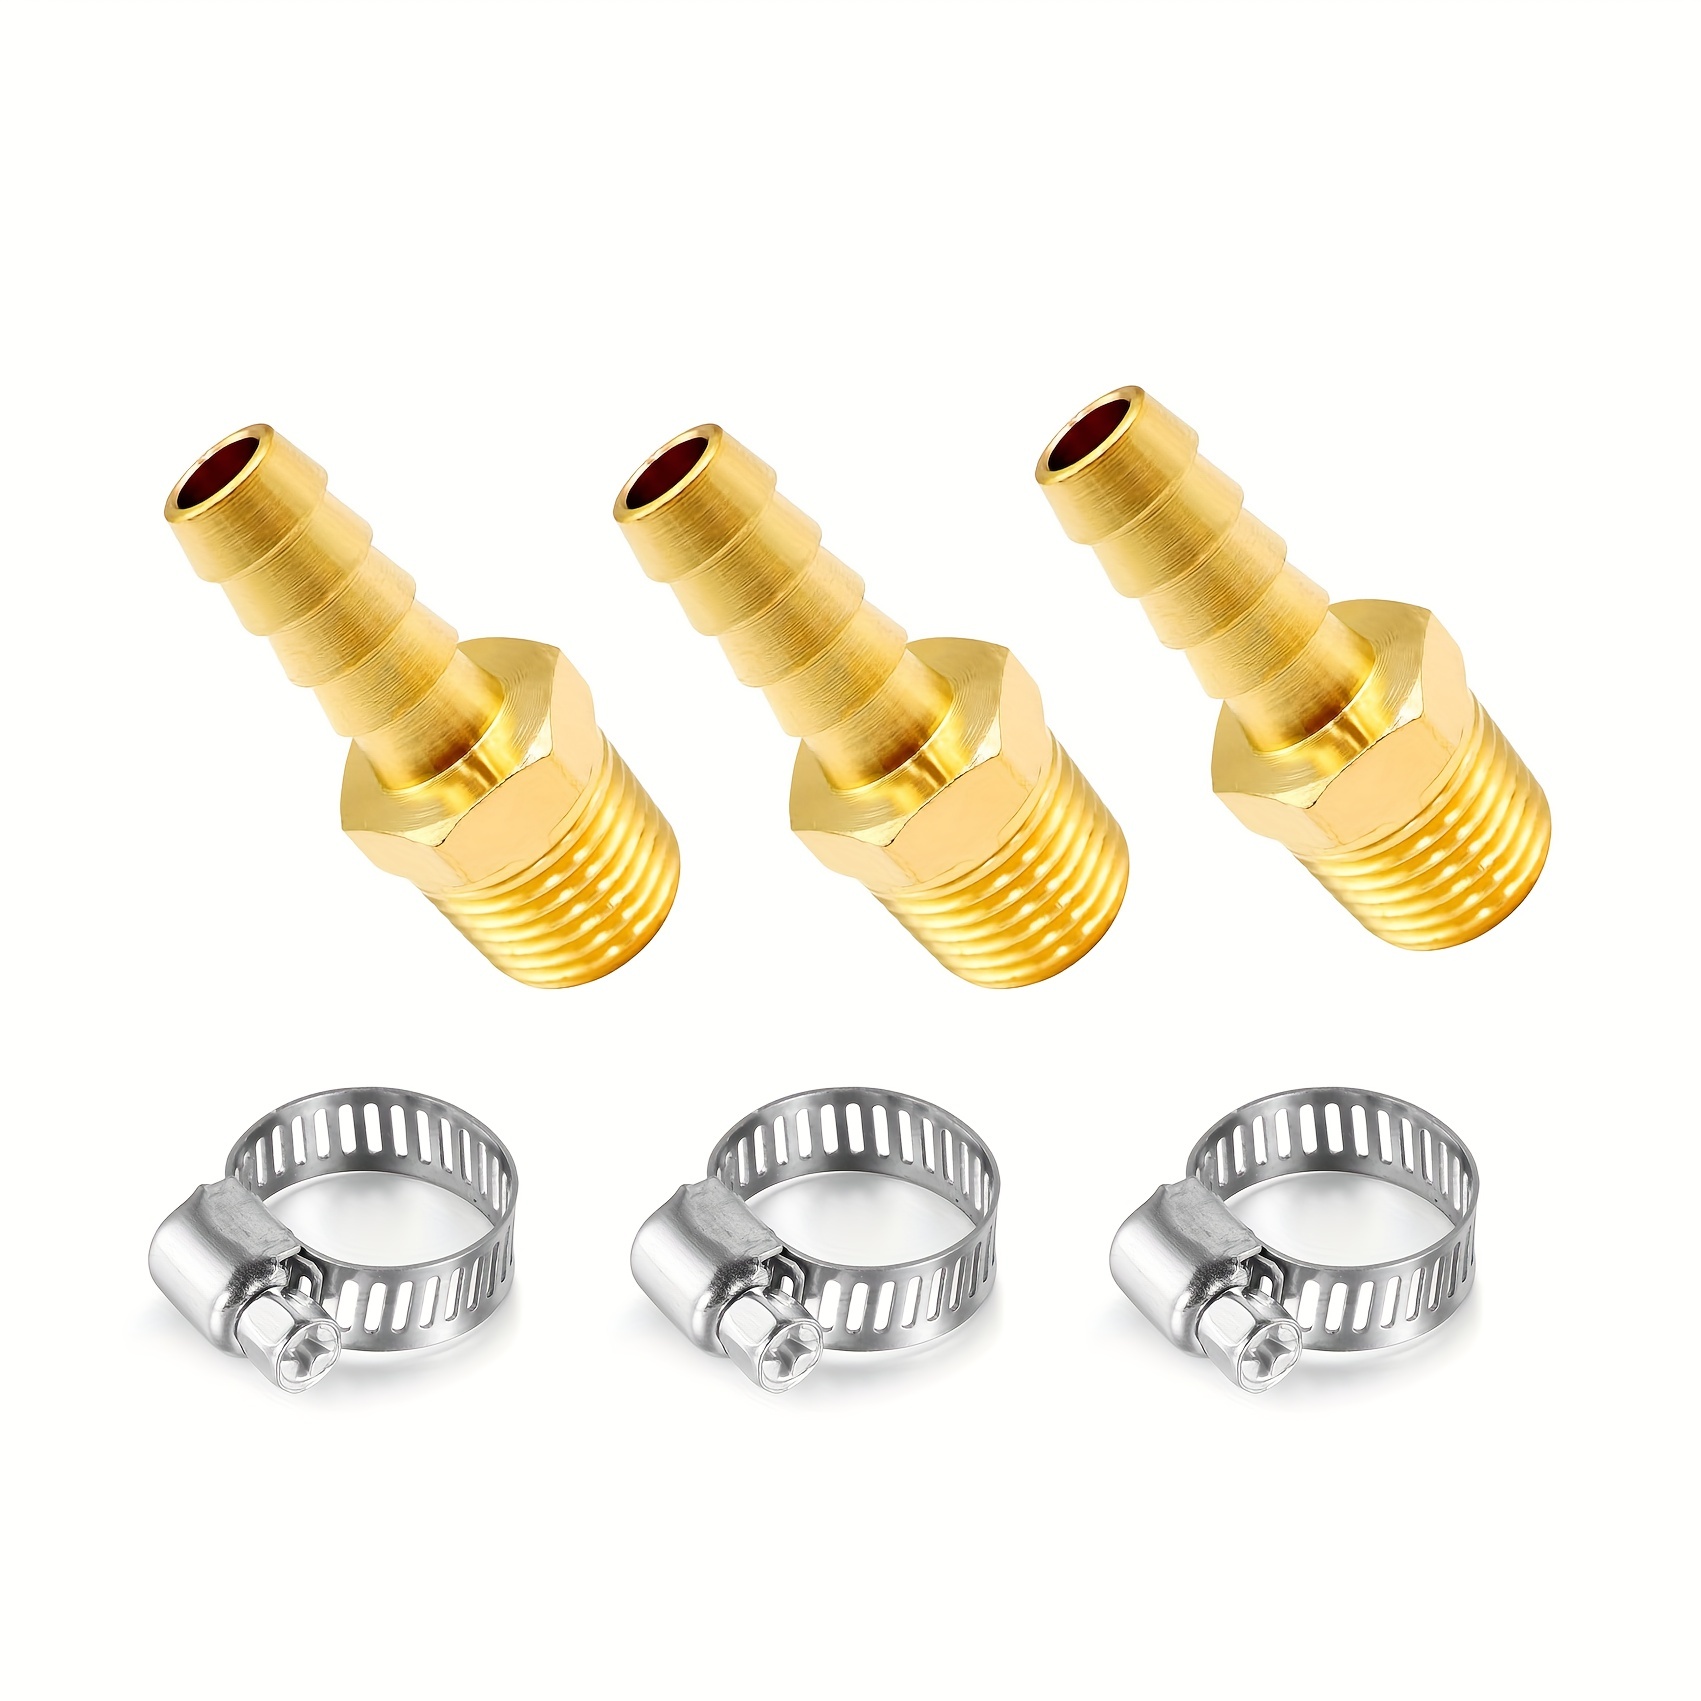 Brass Barb Hose Fitting, 90 Degree Elbow 6mm Barbed to 1/8 G Male Pipe  Adapter Connector 2pcs 